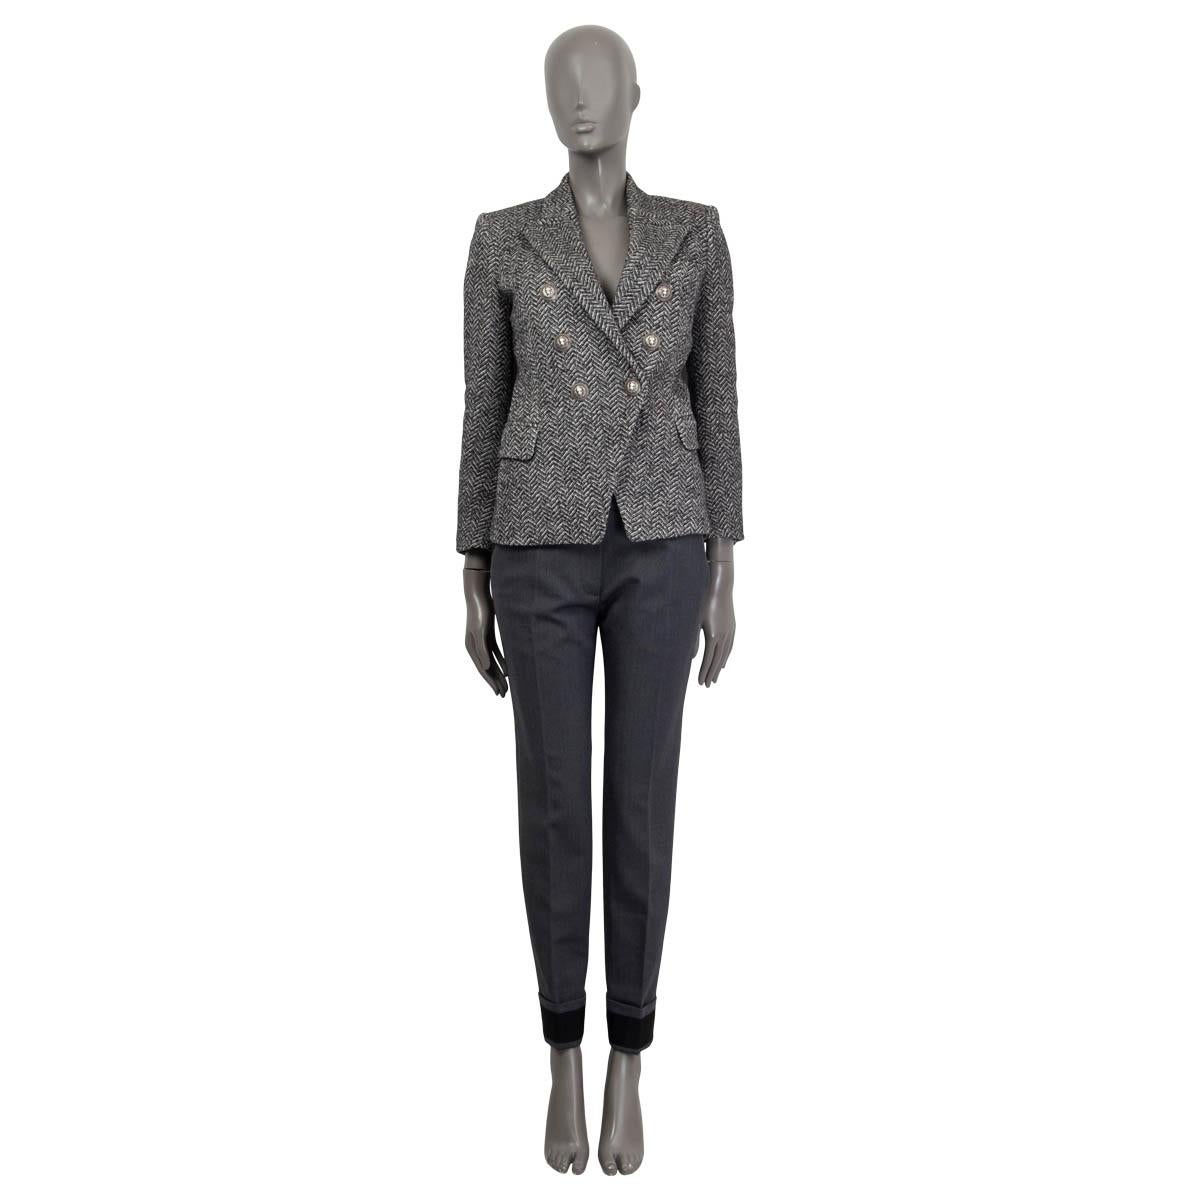 100% authentic Balmain double-breasted herringbone blazer in black and white cotton (52%) and wool (40%) tweed with a slim-fitting silhouette, one sewn shut patch pocket on the chest, two flap pockets and buttoned cuffs. Closes with embosses logo